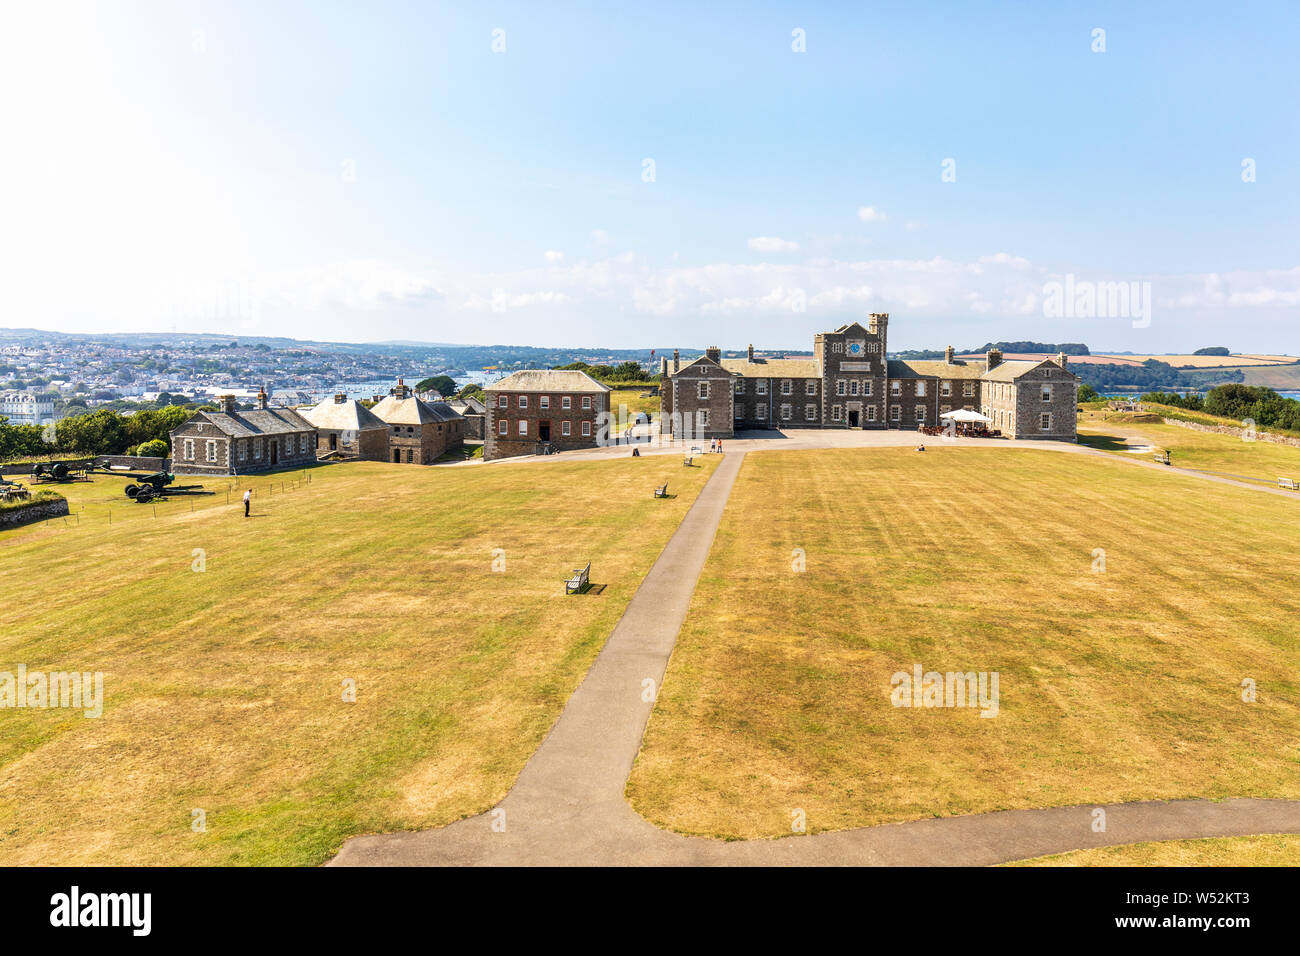 Pendennis Castle is an artillery fort constructed by Henry VIII near Falmouth, Cornwall, England between 1540 and 1542. Stock Photo